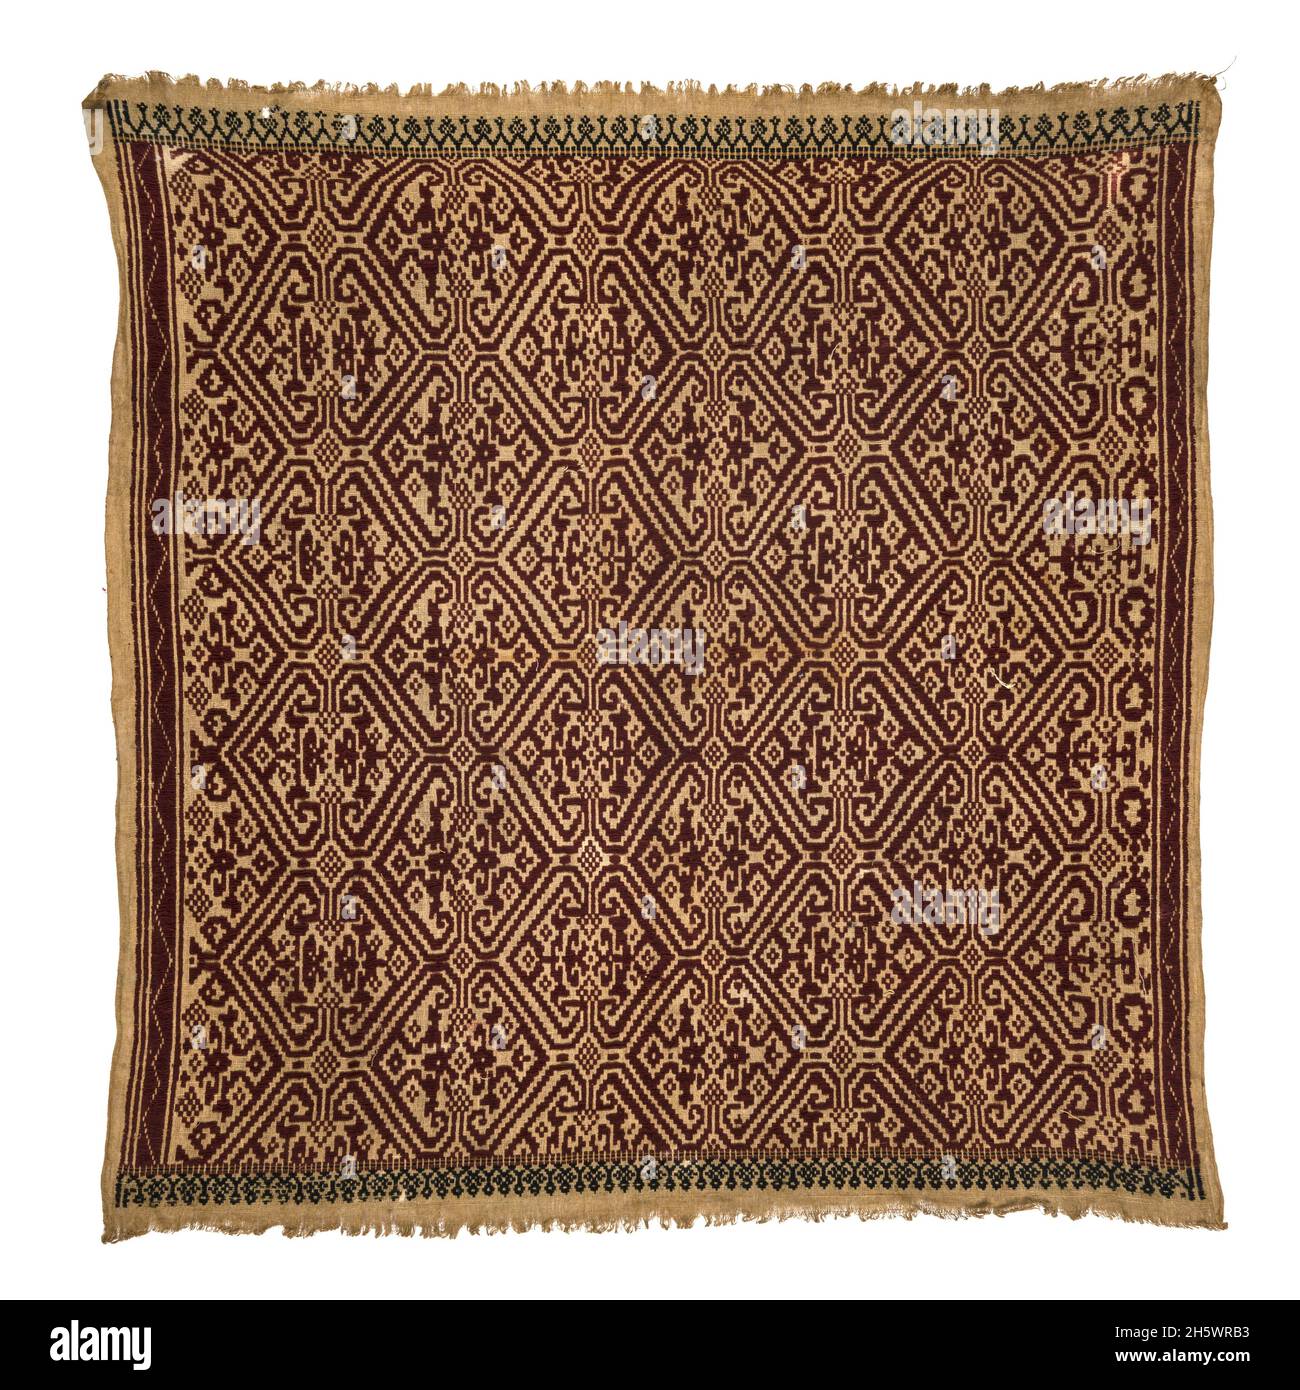 Ceremonial textile, C19th, Lampung, Sumatra. Tampan were used for rites of passage ceremonies, as the focal point for ritual meals, the seat for elders overseeing traditional law, and tied to newly-built houses. Examples from the mountainous interior show stylised natural or domestic subjects and geometric designs, while those from the coast (tampan pasisir) display richly detailed scenes of ships and other motifs. The ship, the main motif, symbolises movement, appropriate to the rites of passage rituals. Stock Photo